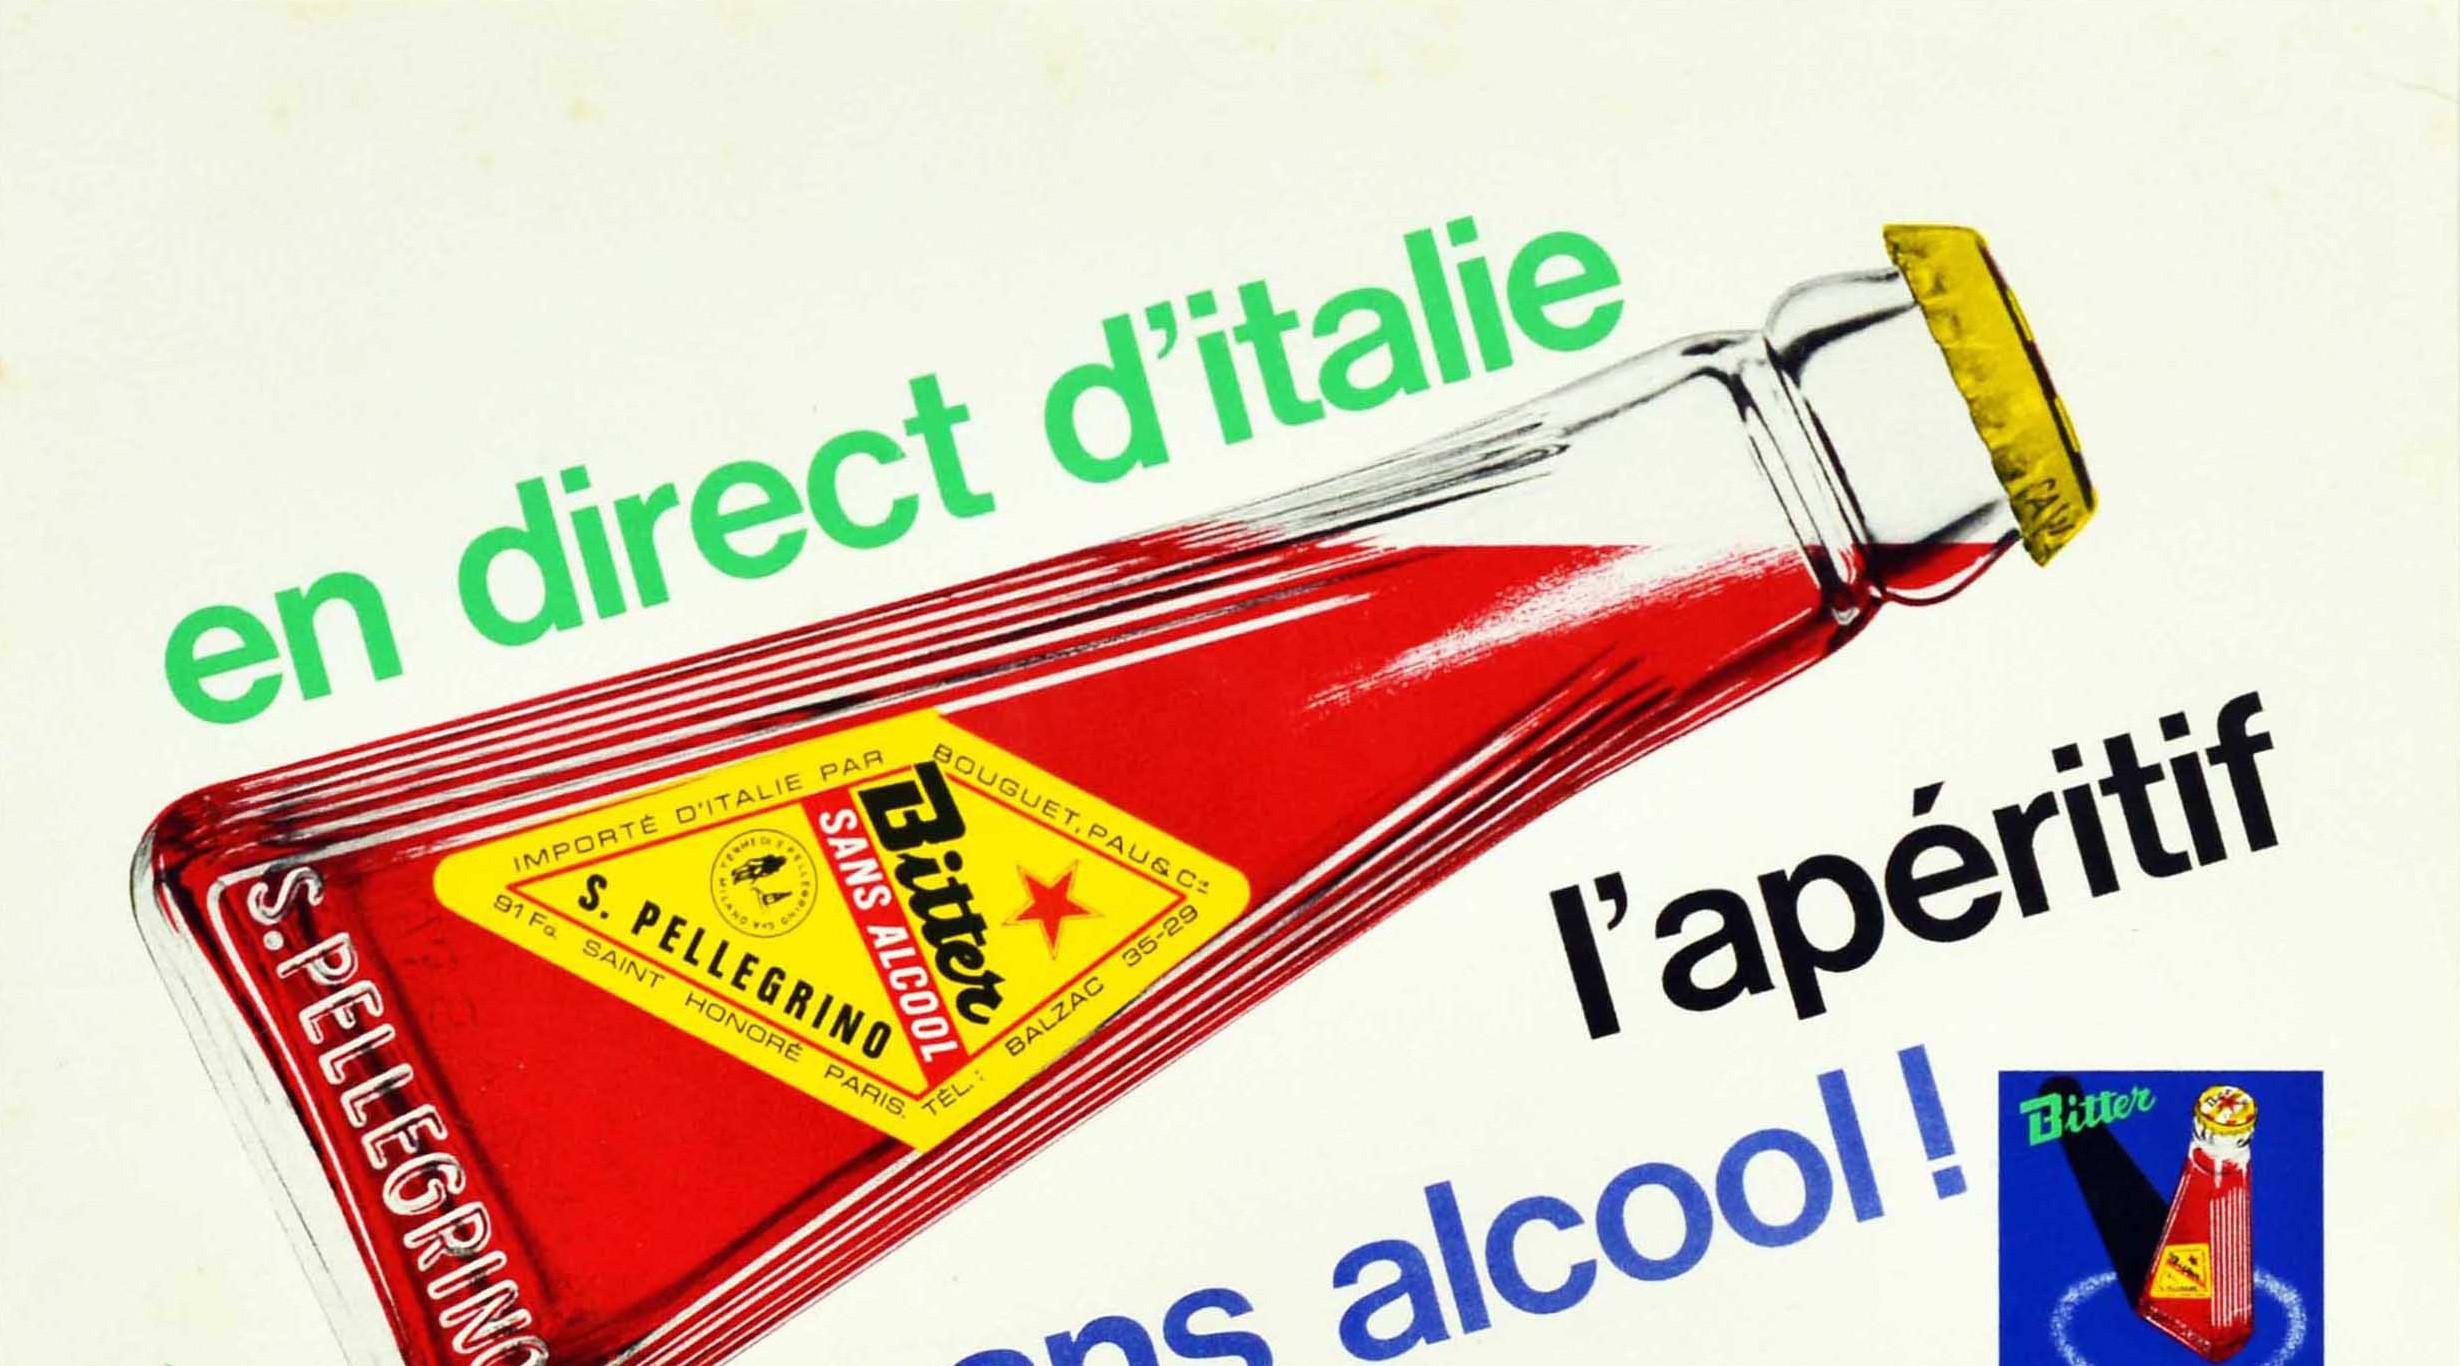 Original vintage drink advertising poster for San Pellegrino Bitter - direct from Italy the aperitif without alcohol / en direct d'Italie l'aperitif sans alcool - featuring an image of the iconic drink bottle between the bold green, black and blue